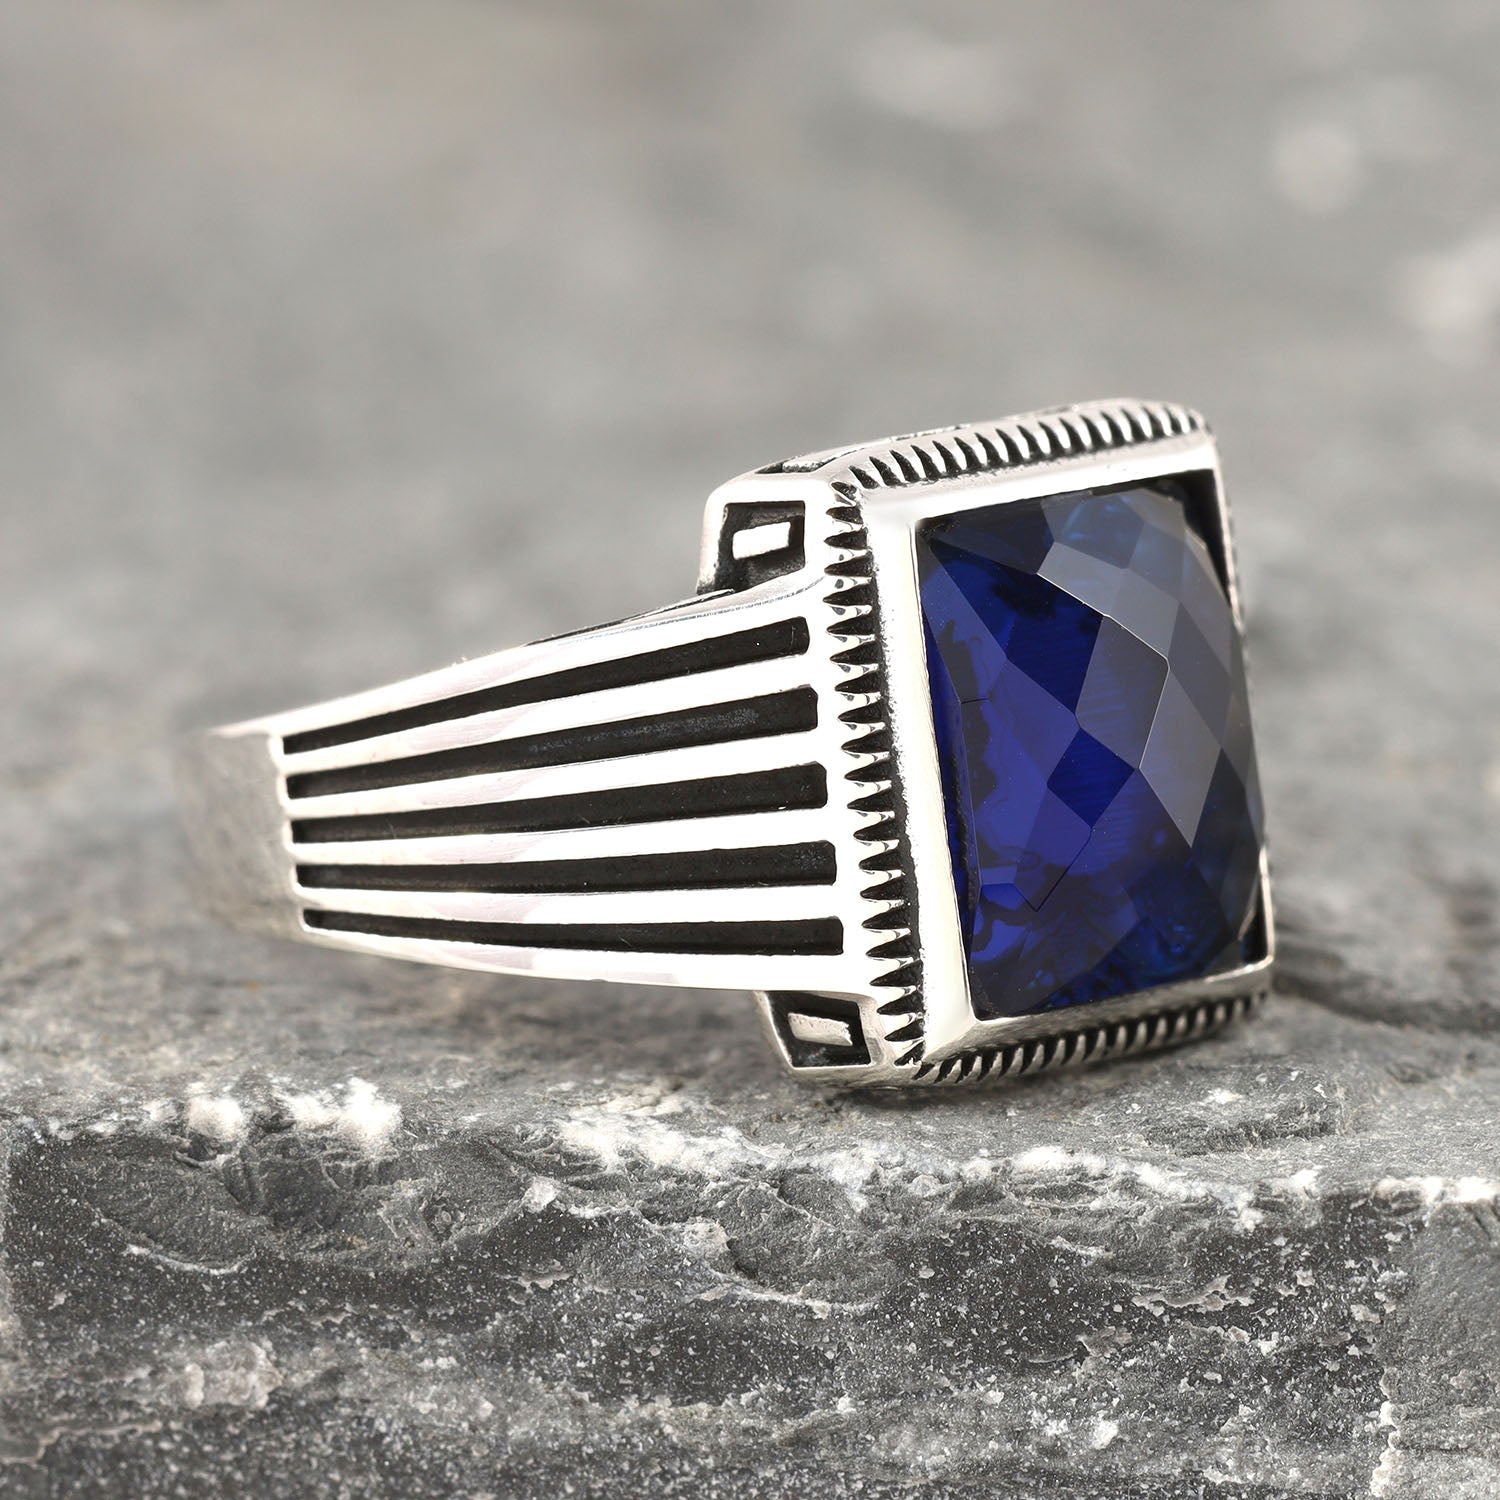 Chimoda Sterling Silver Rings for Men with Blue Zircon Stone, Handmade Mens Jewelry Ring, Striped Motif Mens Ring - Chimoda